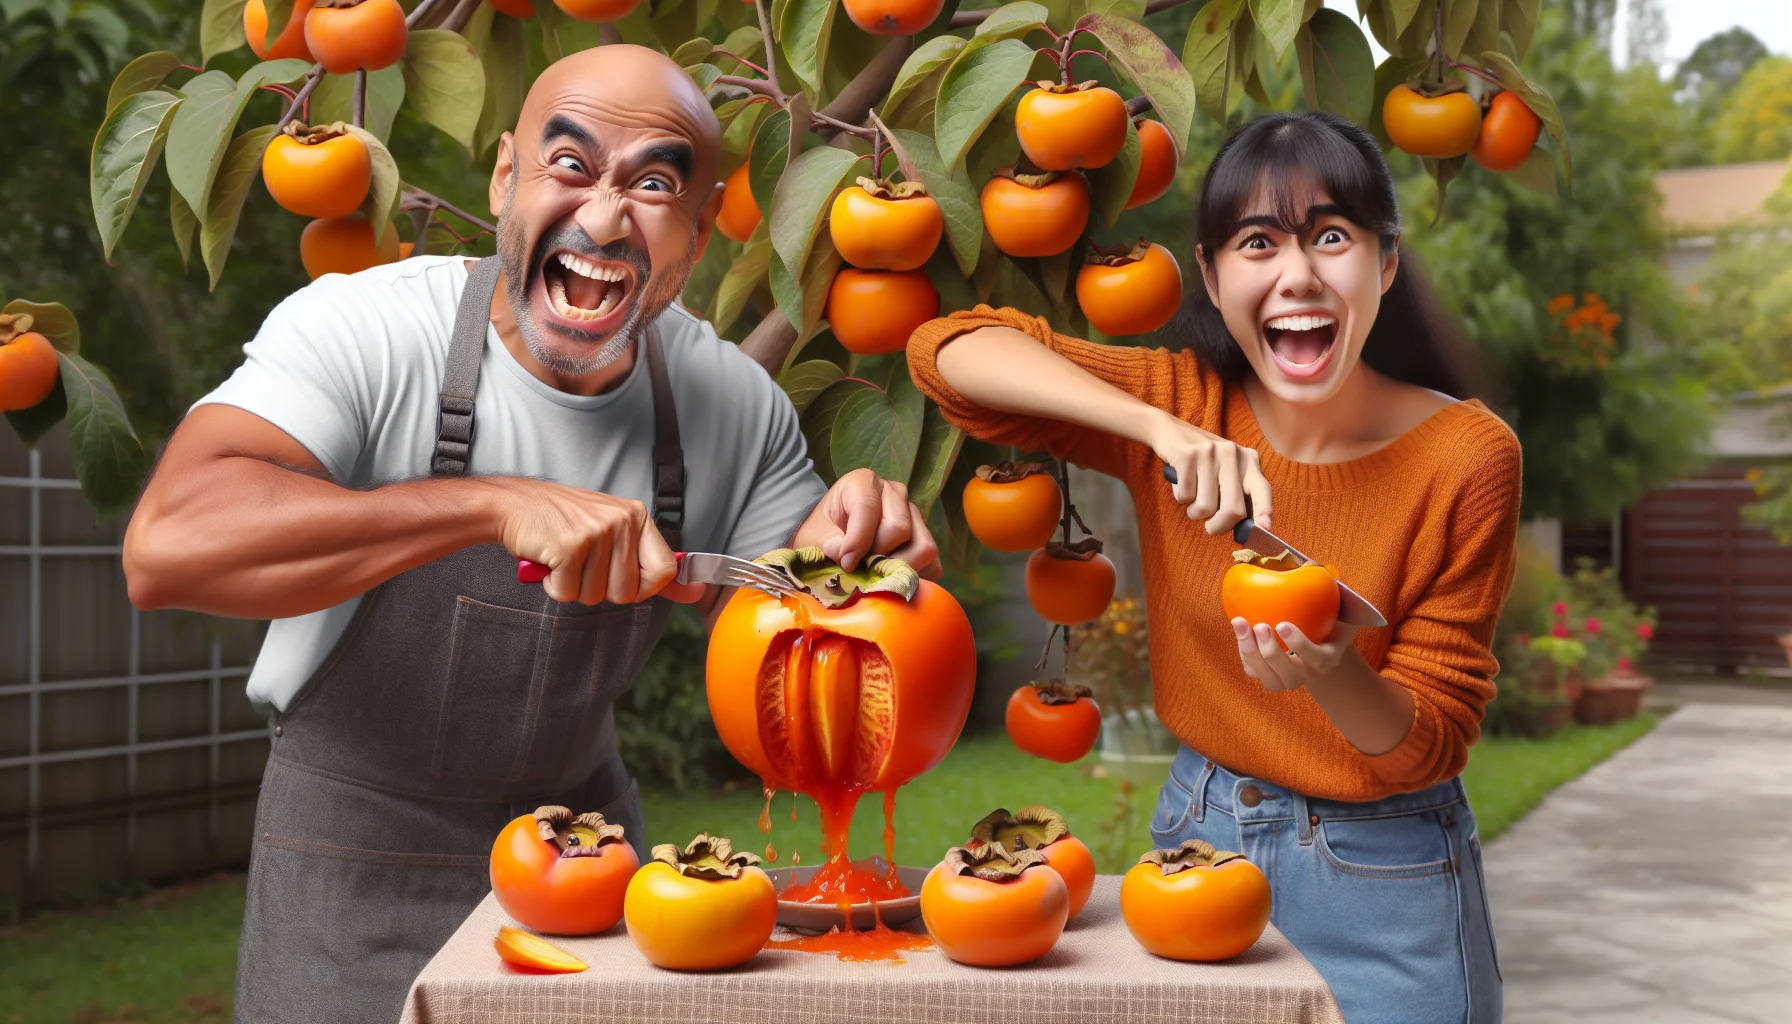 Create a humorous and realistic image of a South Asian man and a Hispanic woman in a garden, demonstrating how to eat a persimmon fruit. They're standing by a fully-grown persimmon tree laden with ripe, shiny, and bright orange persimmons. The man is trying to bite into the whole fruit while the juice drips onto his chin, causing laughter. The woman is slicing another persimmon with a knife, having a more civilized approach. Joy and fun fill the garden, radiating the appeal of home-gardening and fruit consumption.